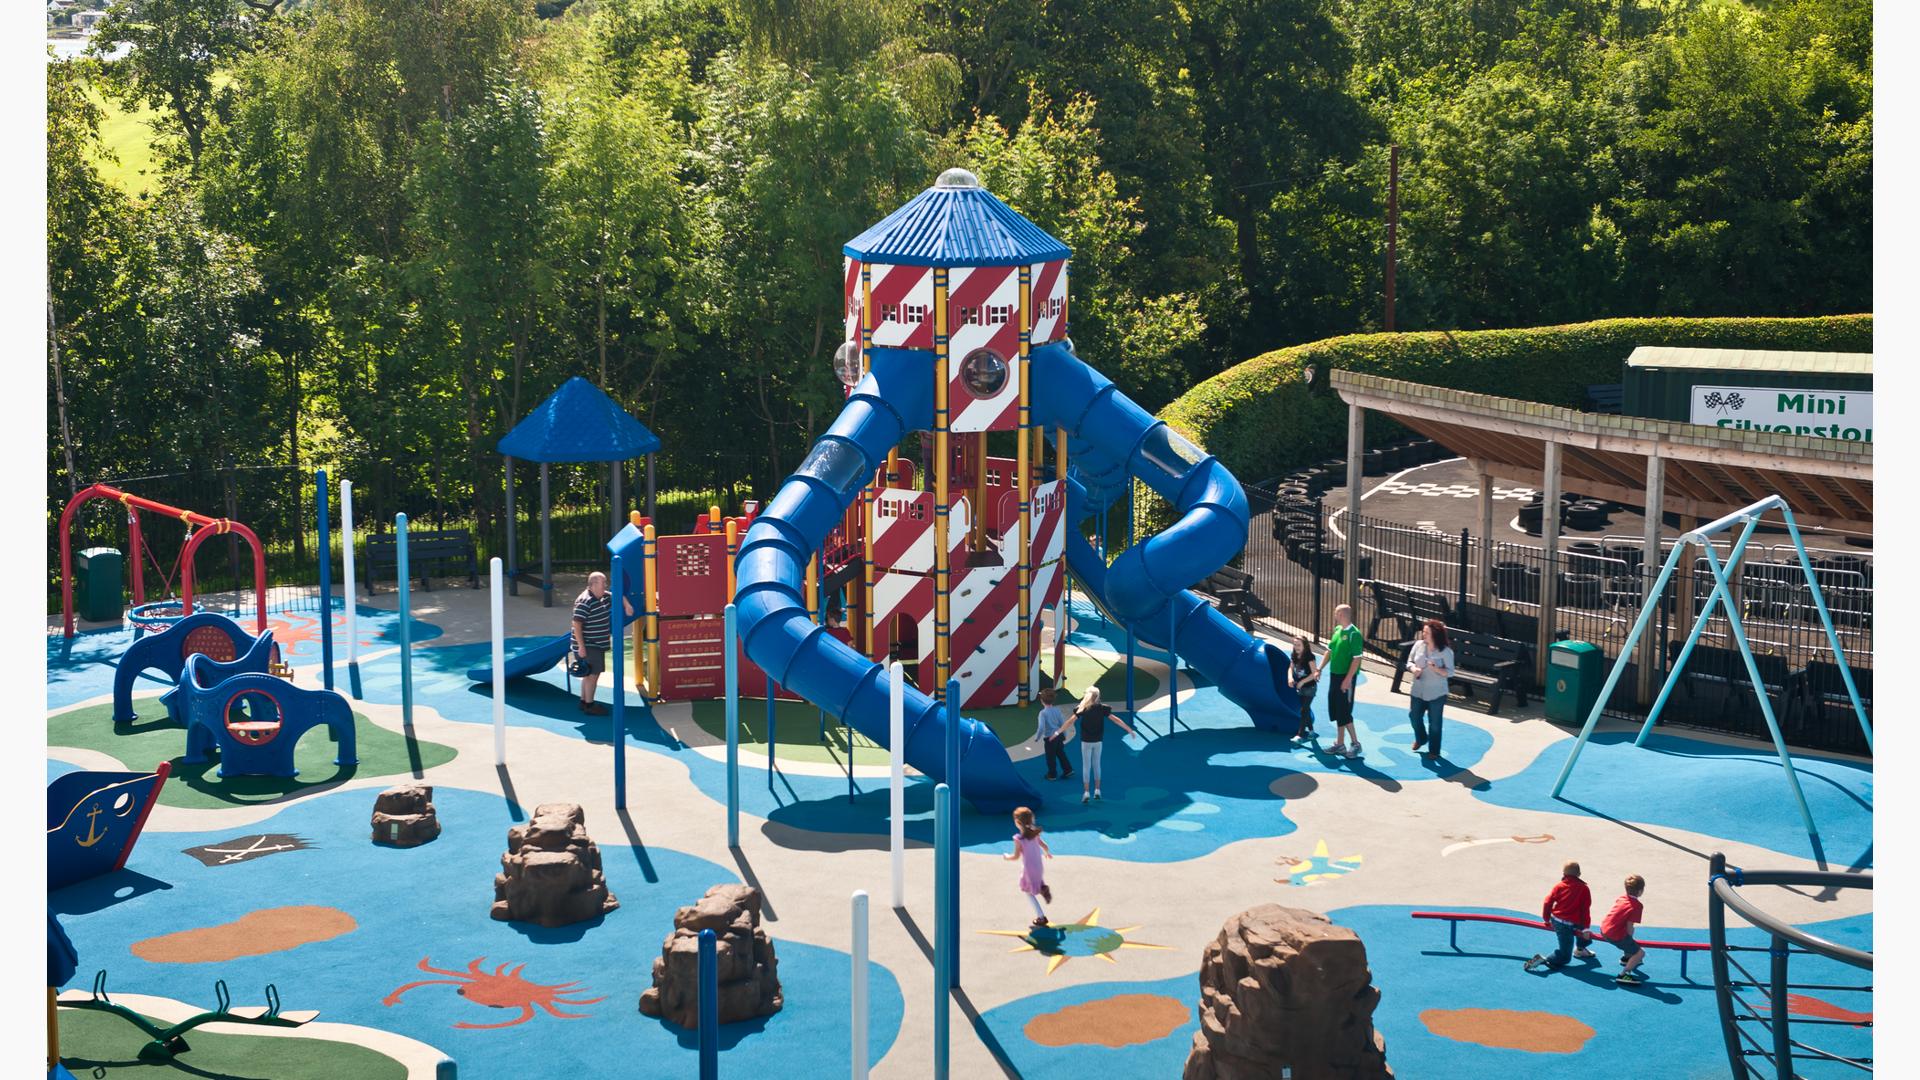 Elevated view of a nautical themed playground with a large two leveled tower designed with striped red and white siding panels and two blue tunnel slides.